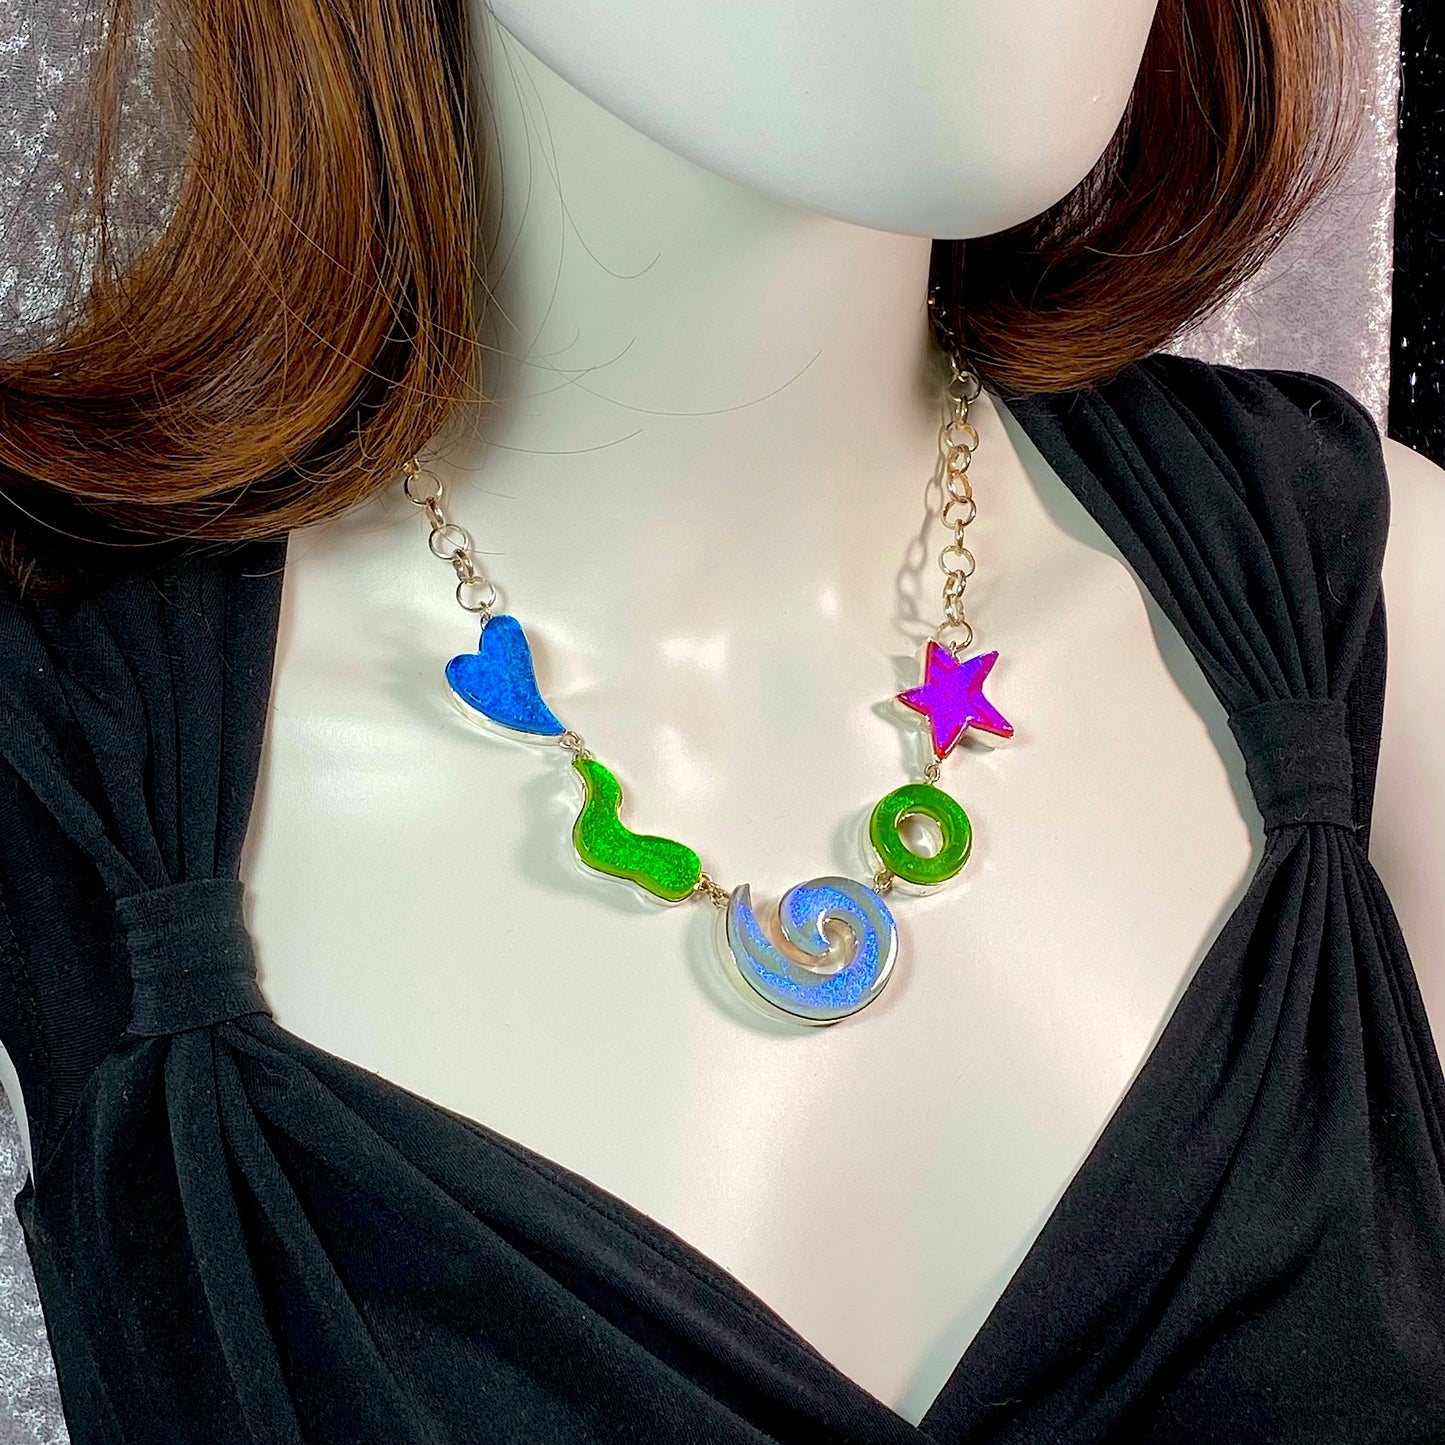 Statement necklace in turquoise, green, lavendar, and pink glass in sterling silver, fused glass, glass jewelry, glass and silver jewelry, handmade, handcrafted, American Craft, hand fabricated jewelry, hand fabricated jewellery, Athen, Georgia, colorful jewelry, sparkle, bullseye glass, dichroic glass, art jewelry